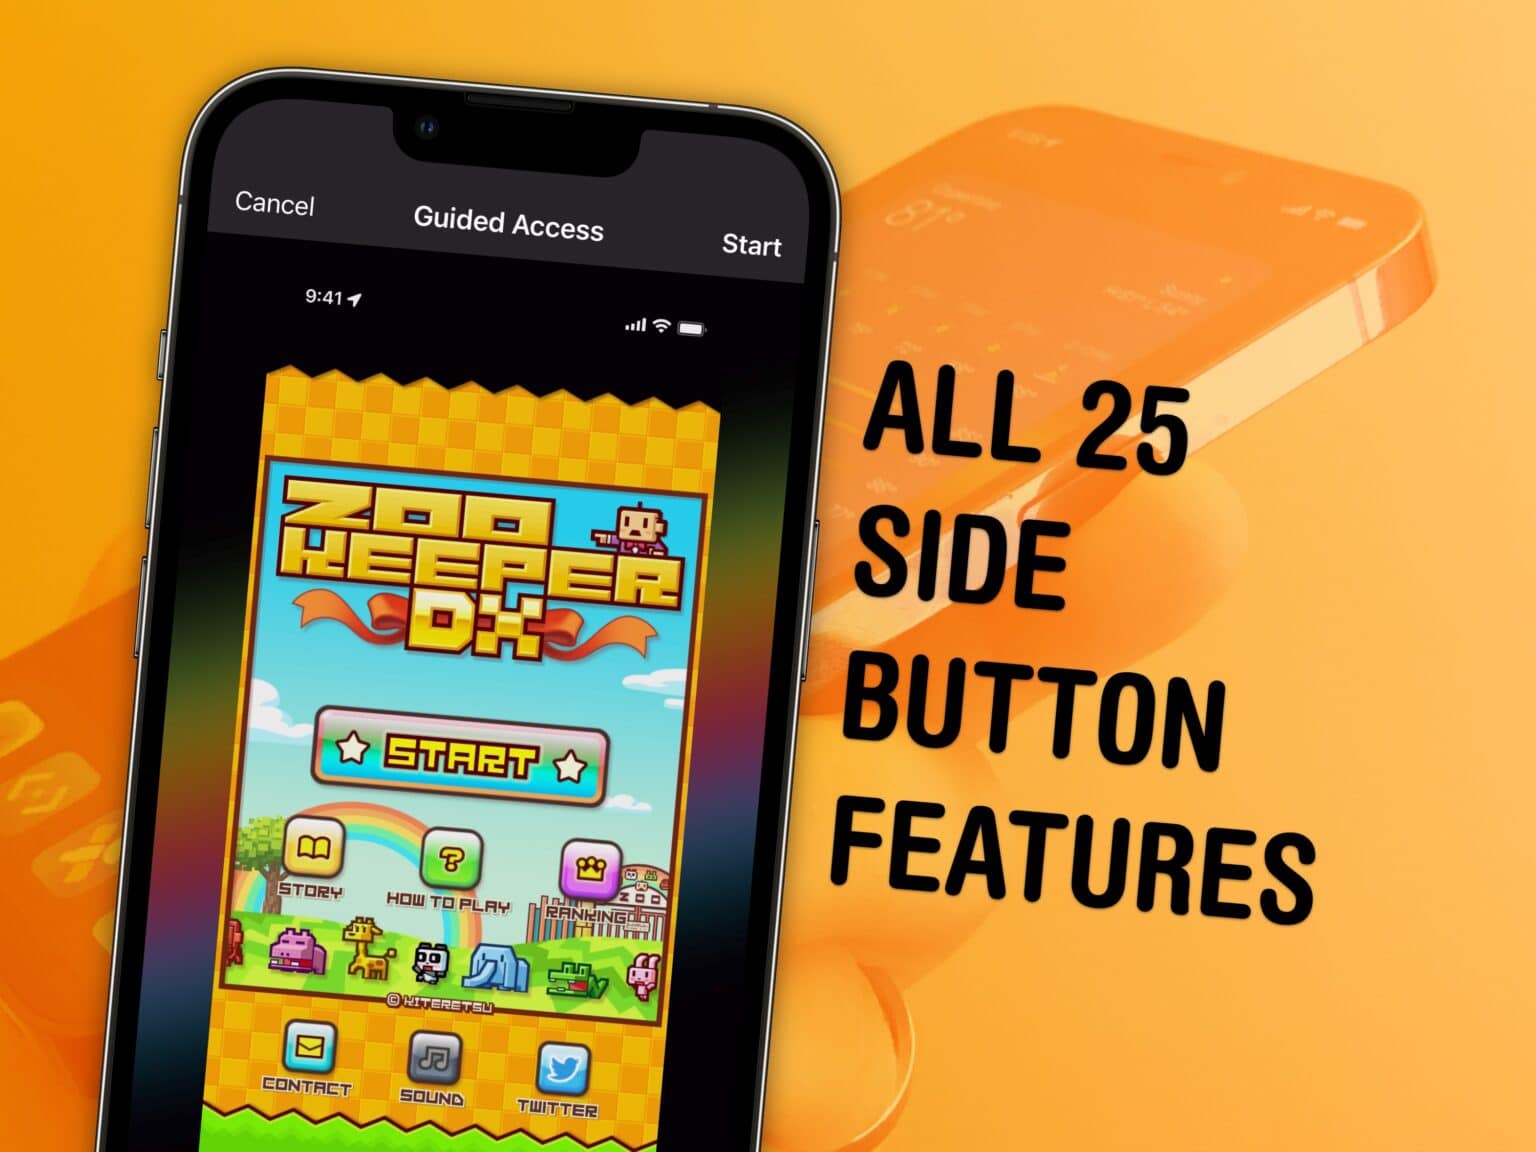 All 25 Side Button Features